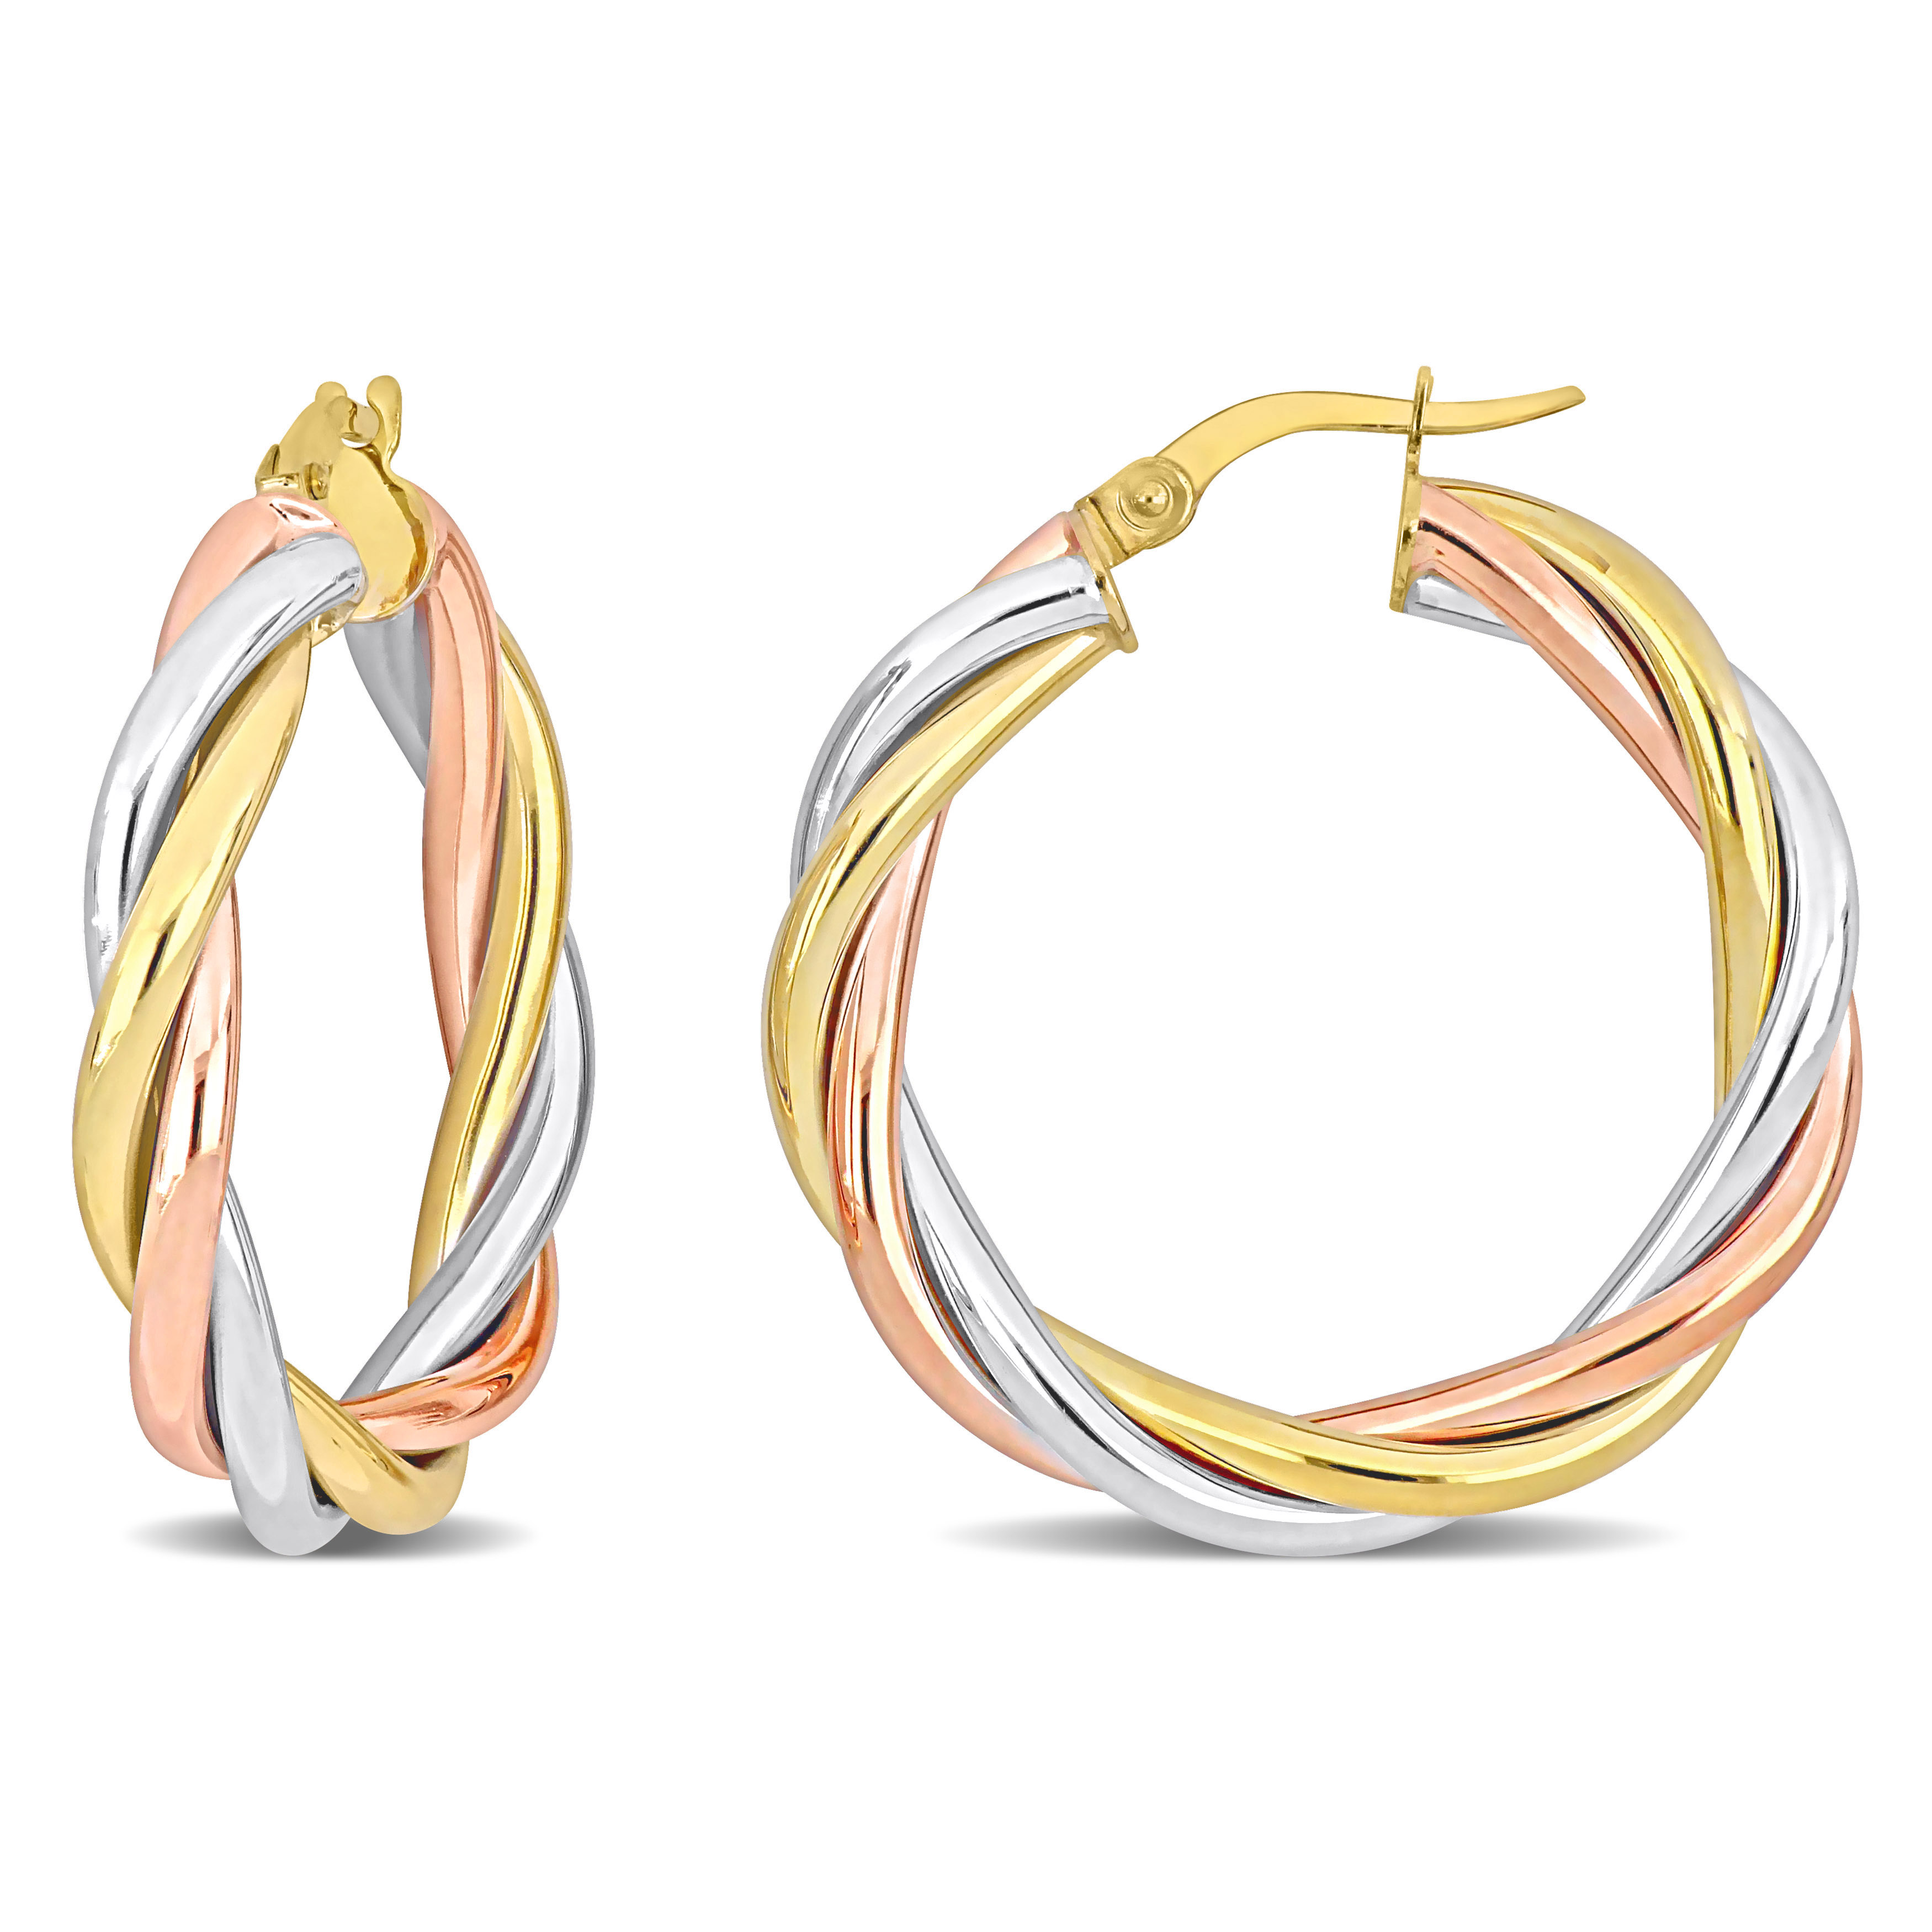 31 MM Twisted Hoop Earrings in 3-Tone 14k Yellow, Rose and White Gold